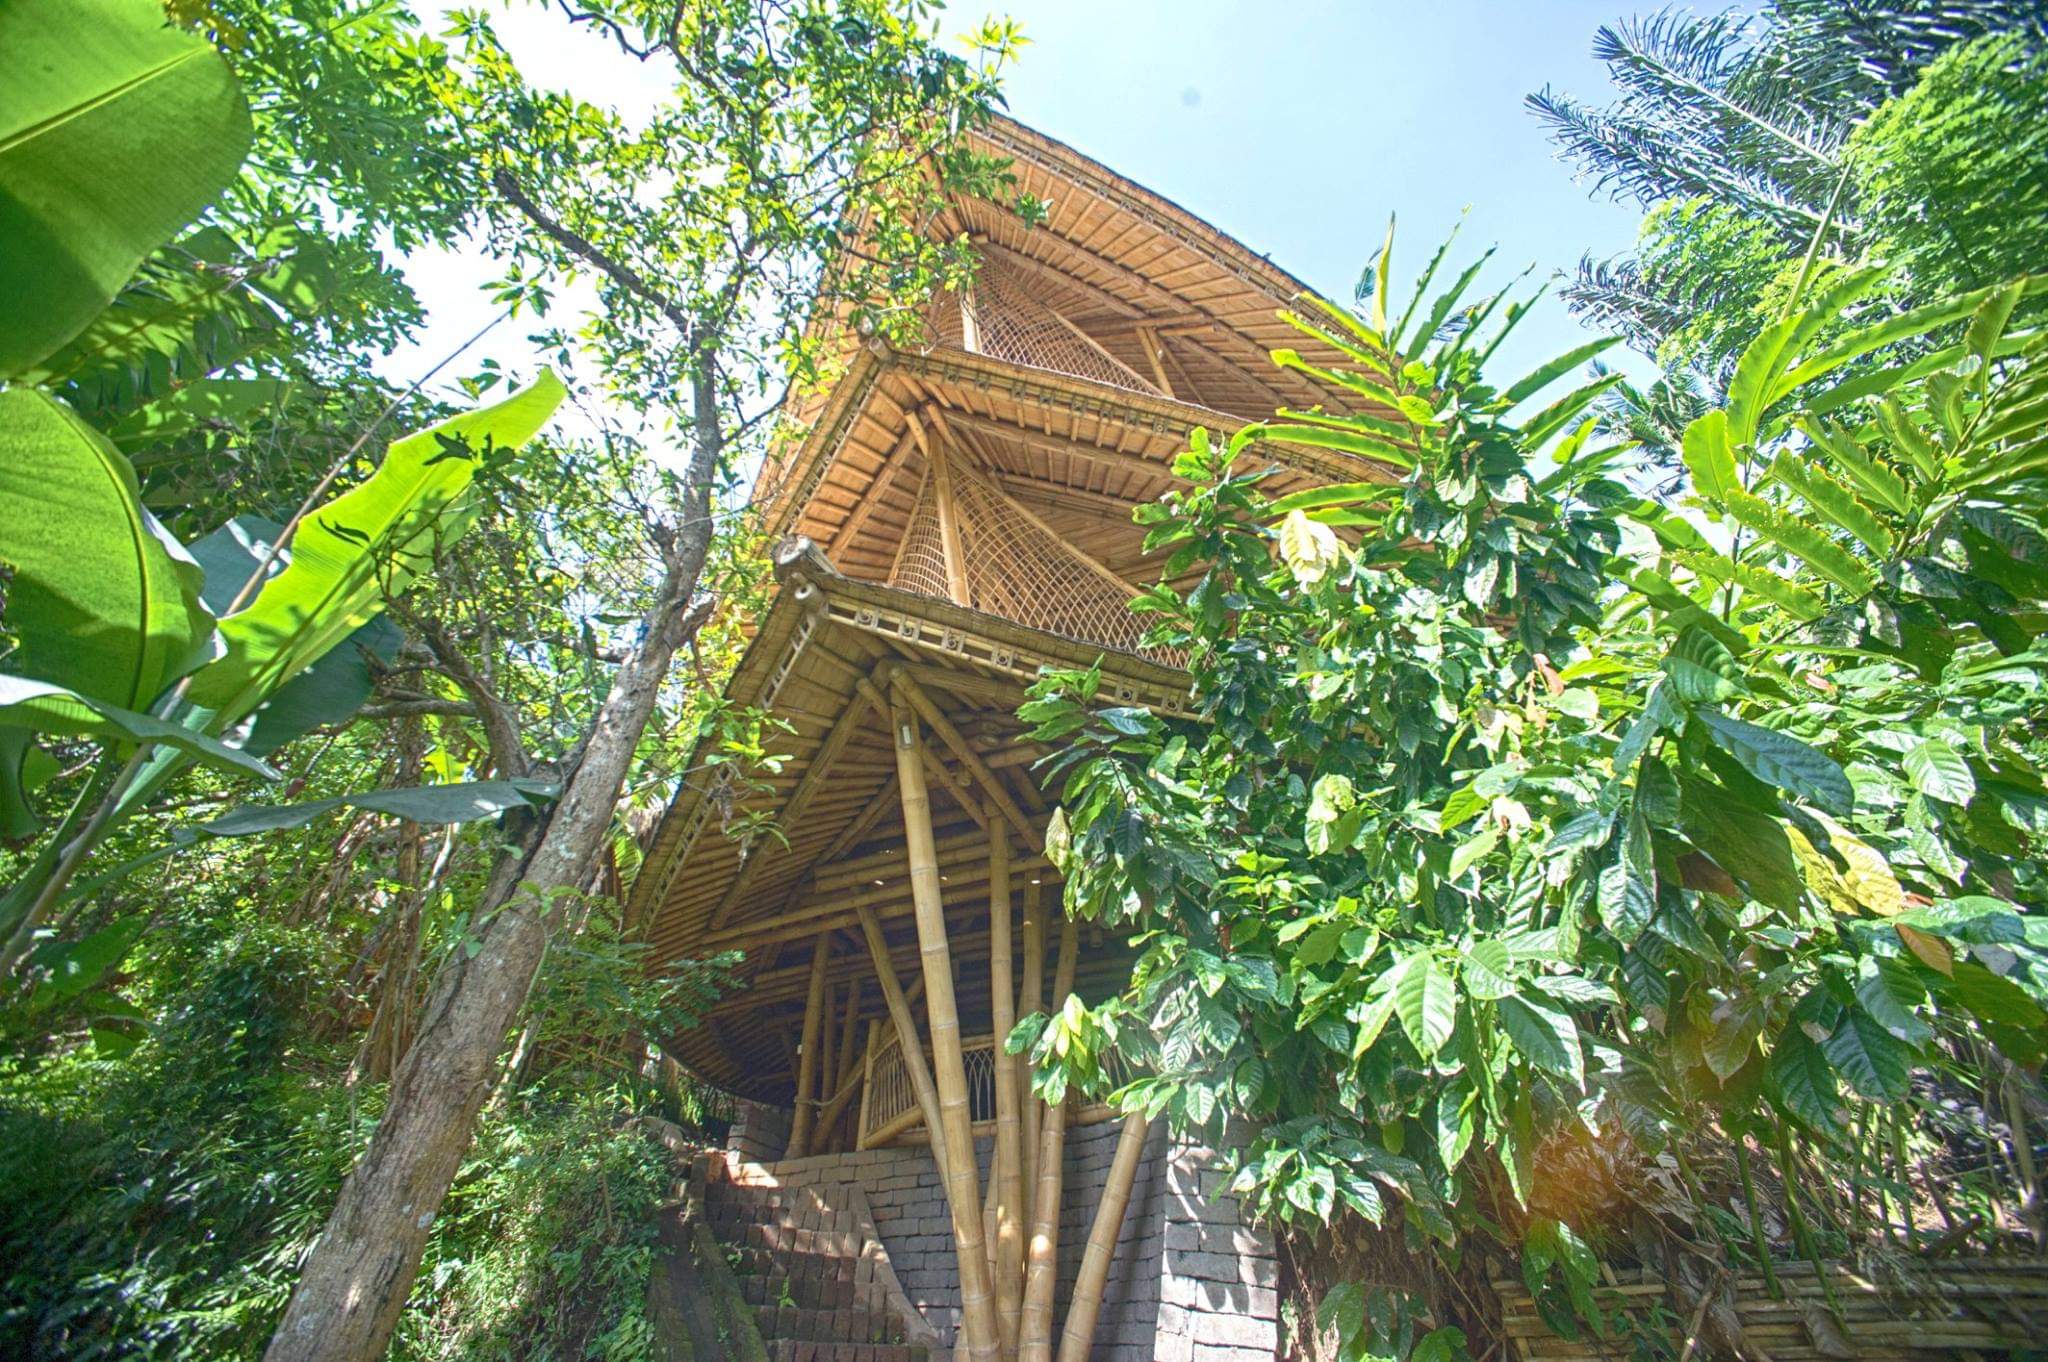 The large open-air structures were created from local, natural, renewable material, primarily bamboo, and the remaining open space has been planted with organic fruit, vegetable gardens and rice paddies.